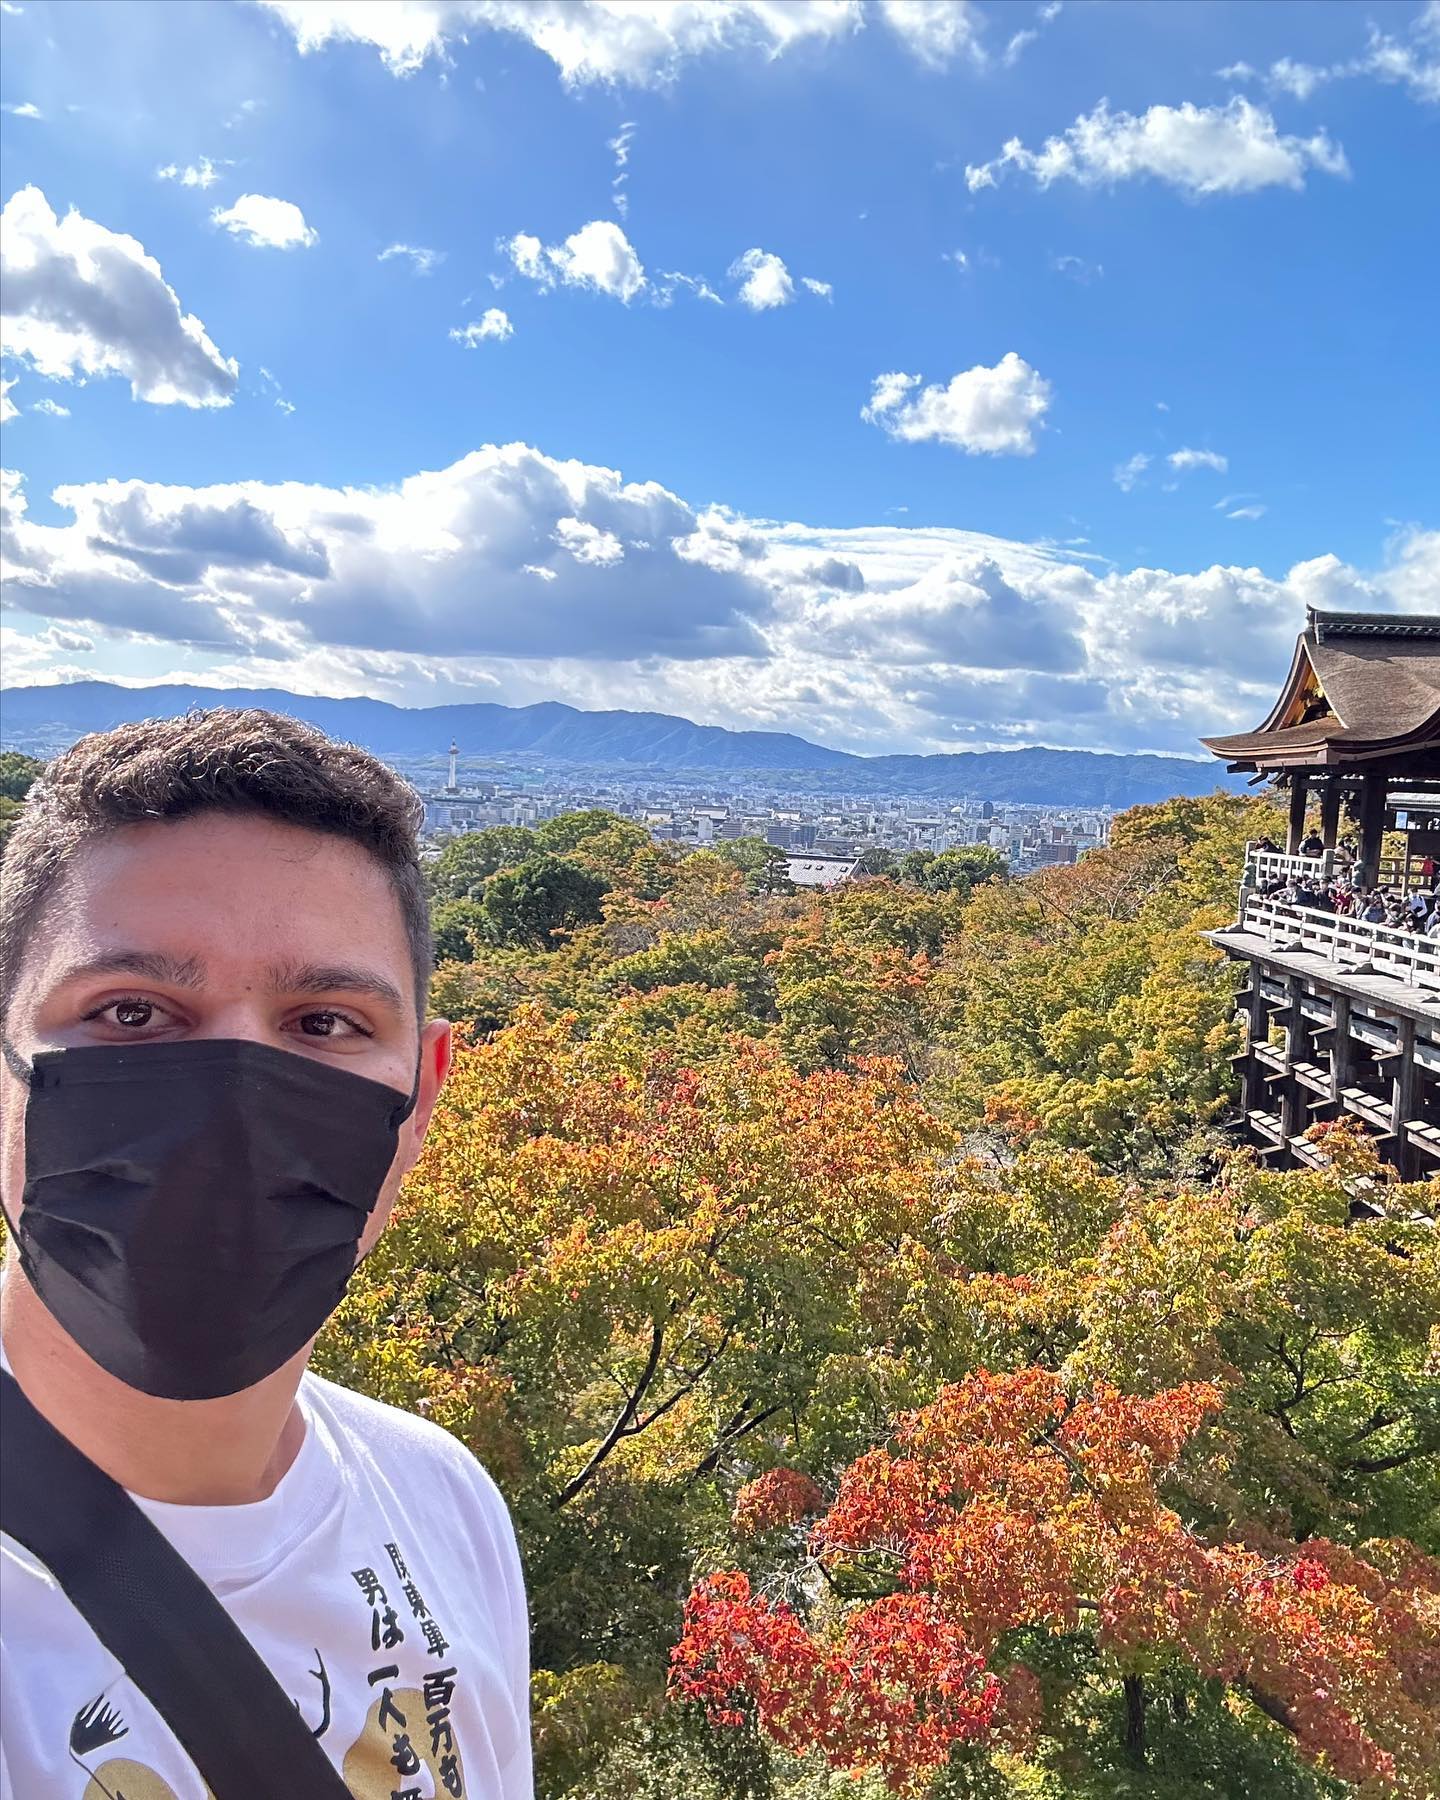 Some days in Kyoto, it was my favorite city in Japan.